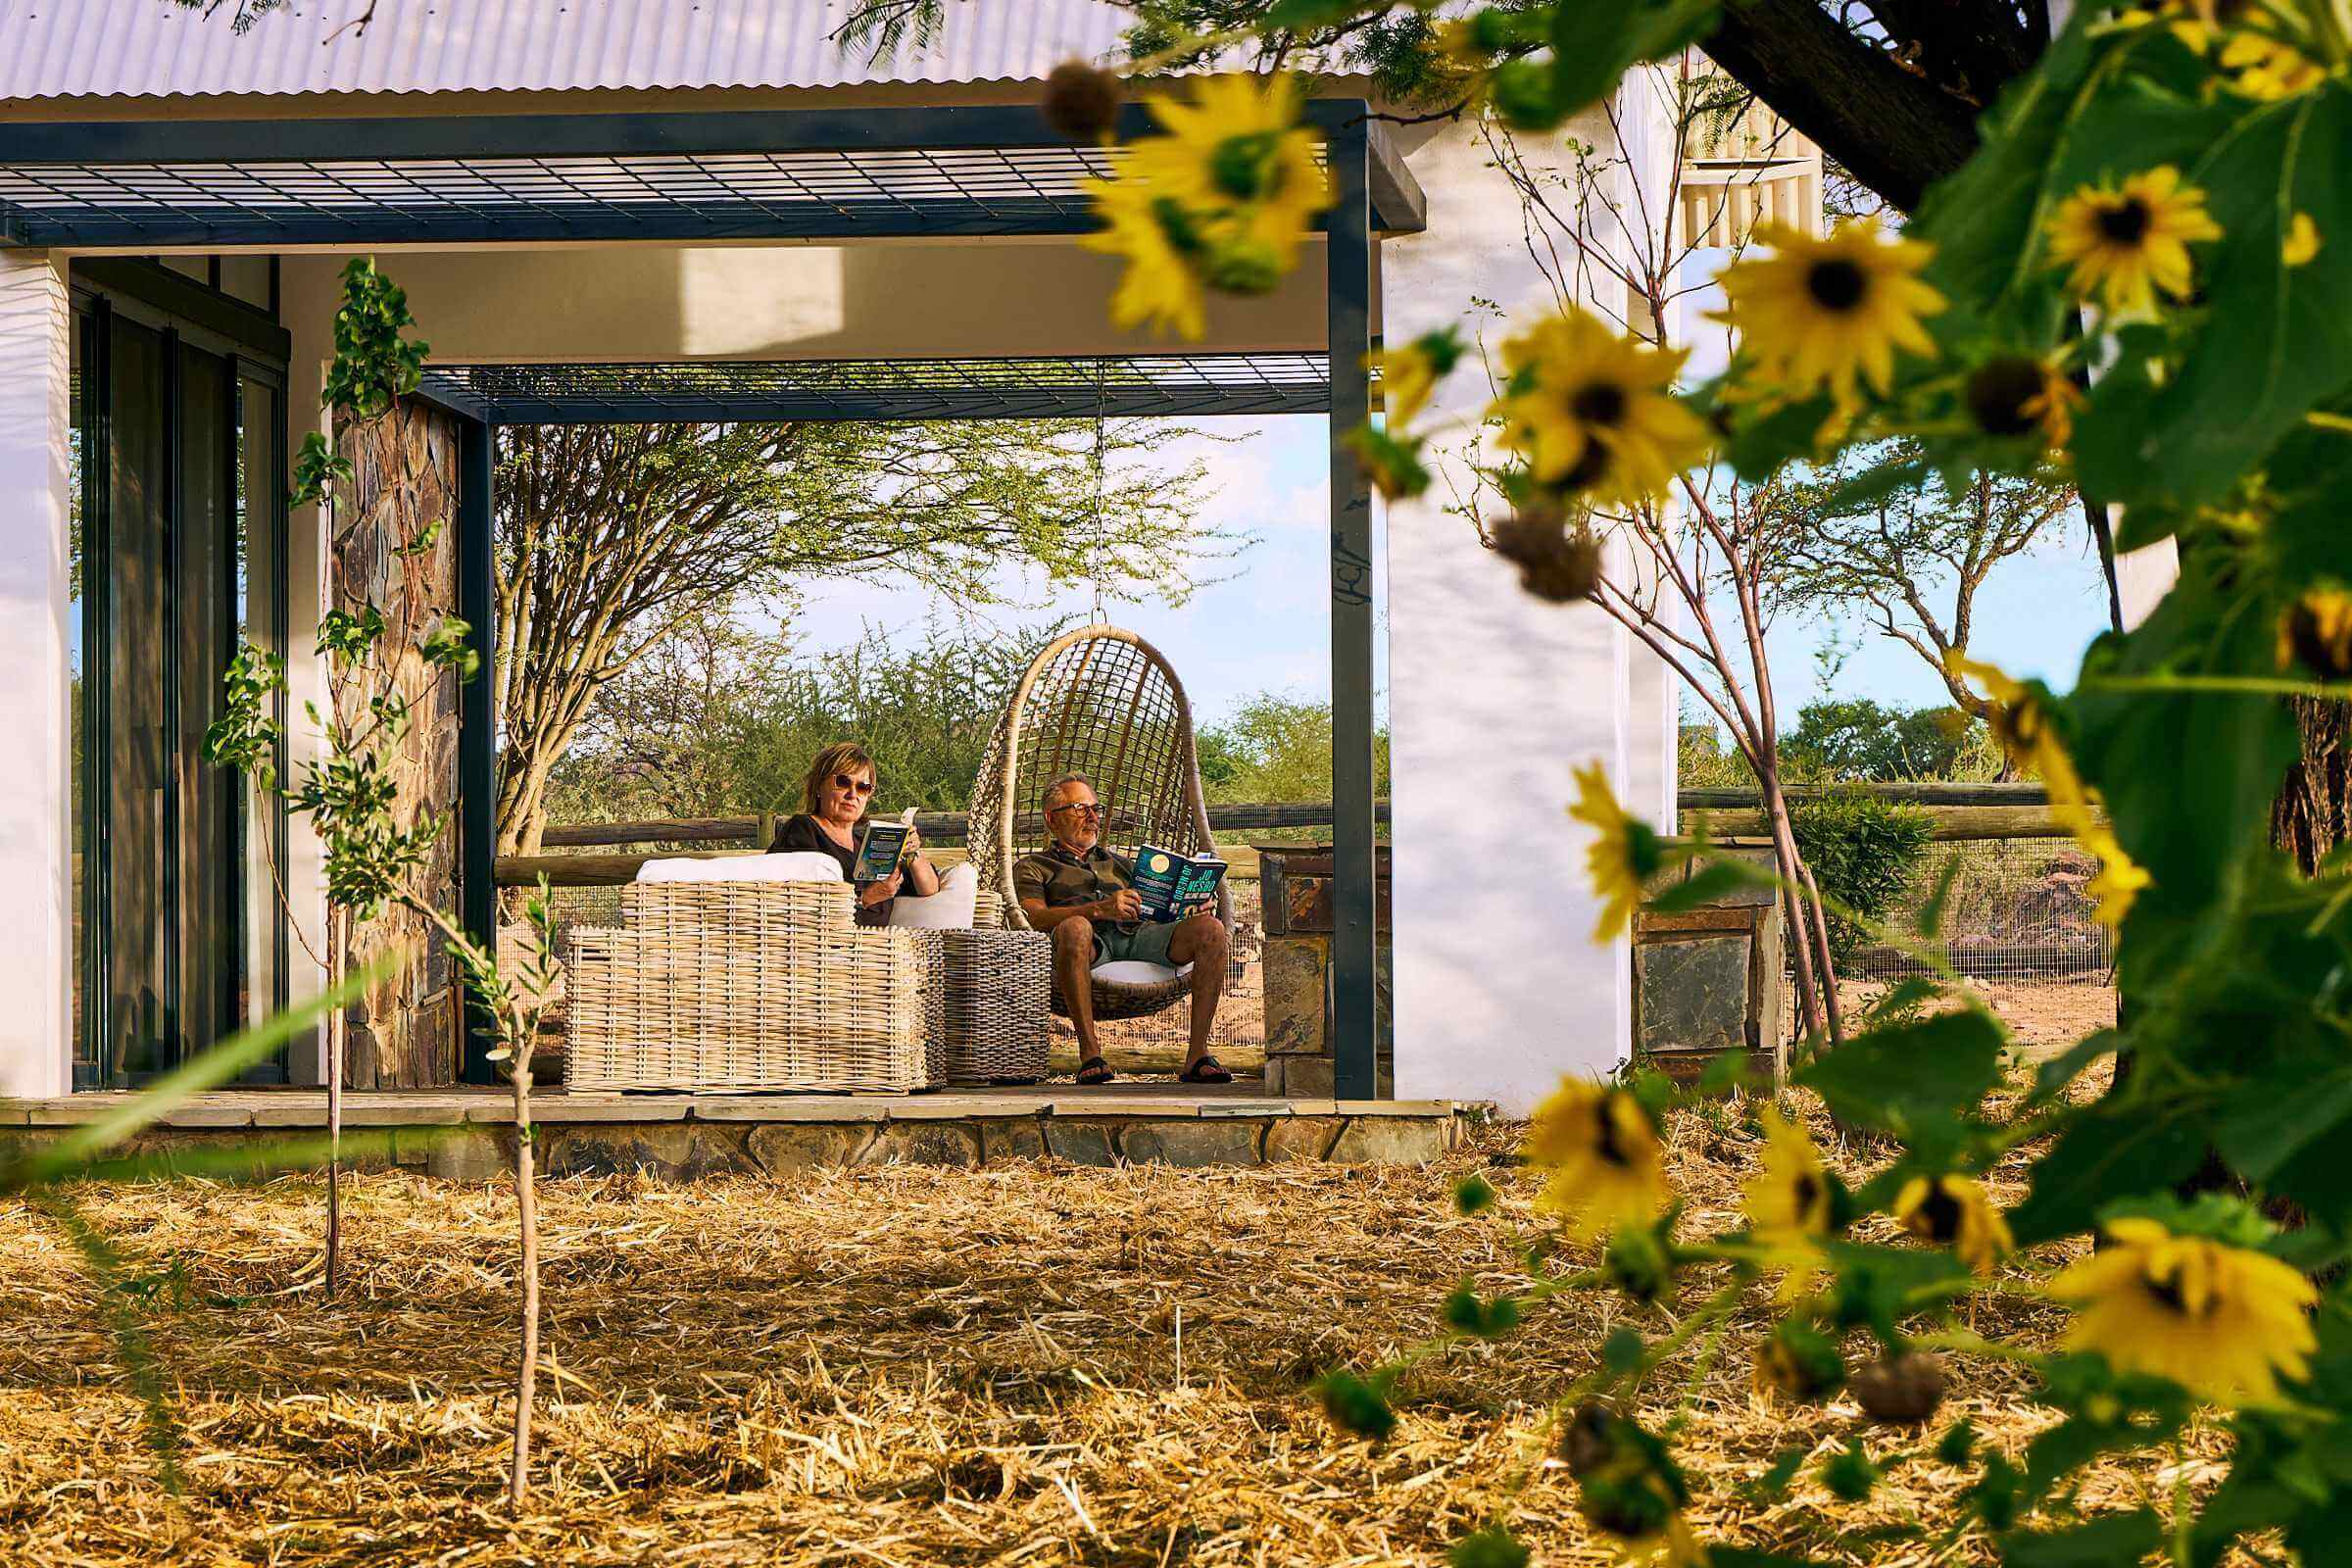 A couple soaks up the evening tranquillity from the comfort of their private veranda at one of the units at Sandwerf.